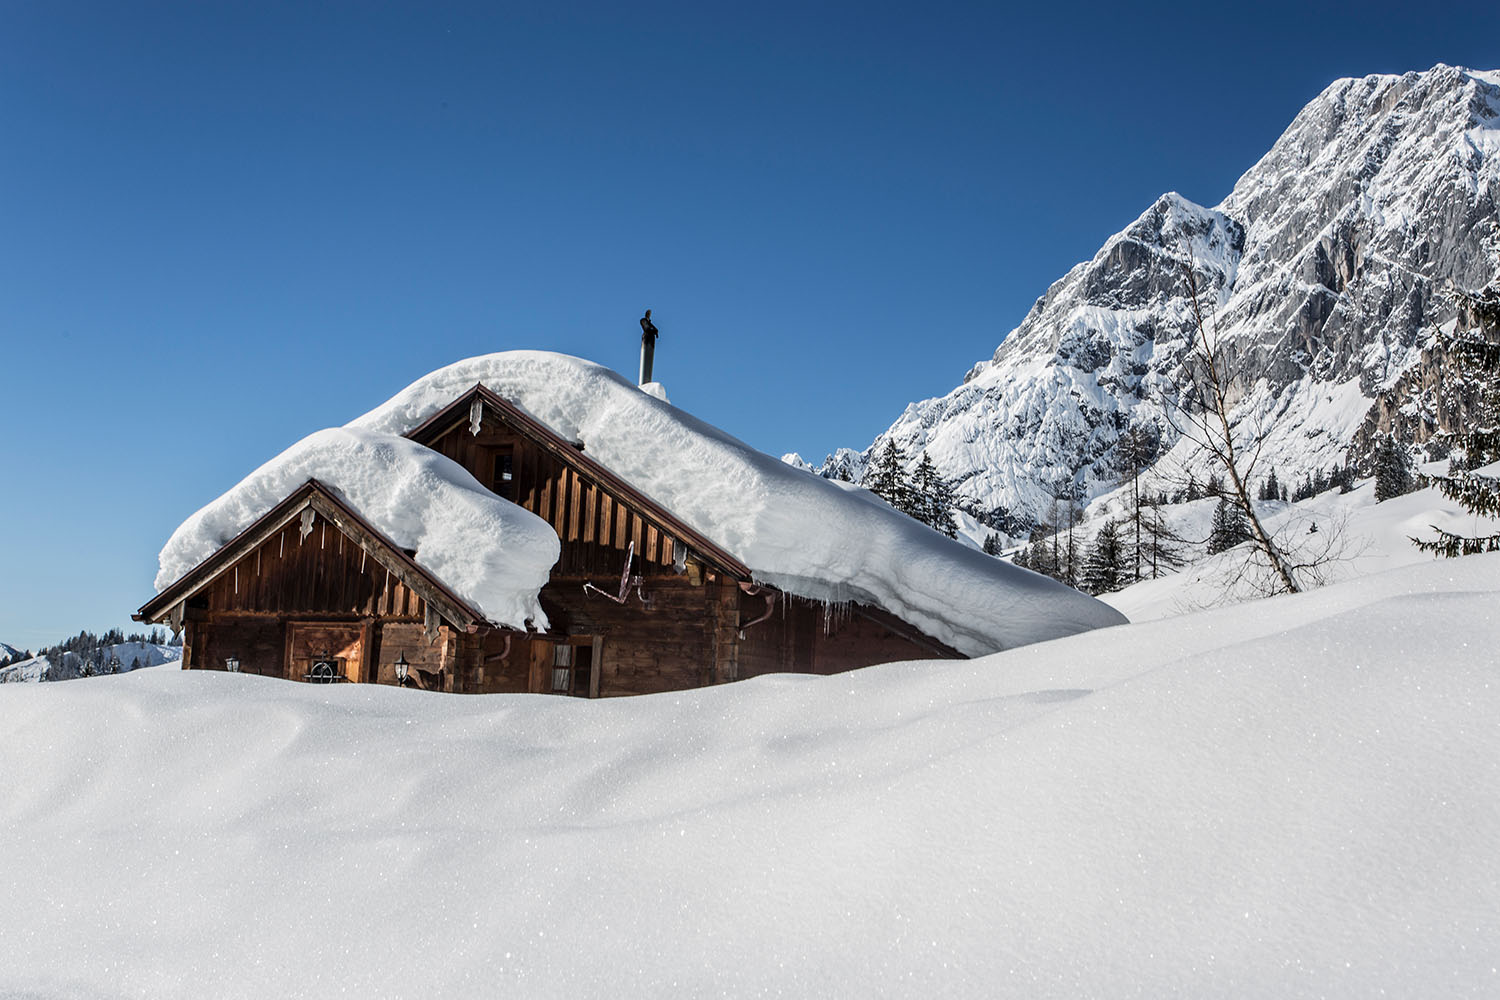 Mountain hut in the snow